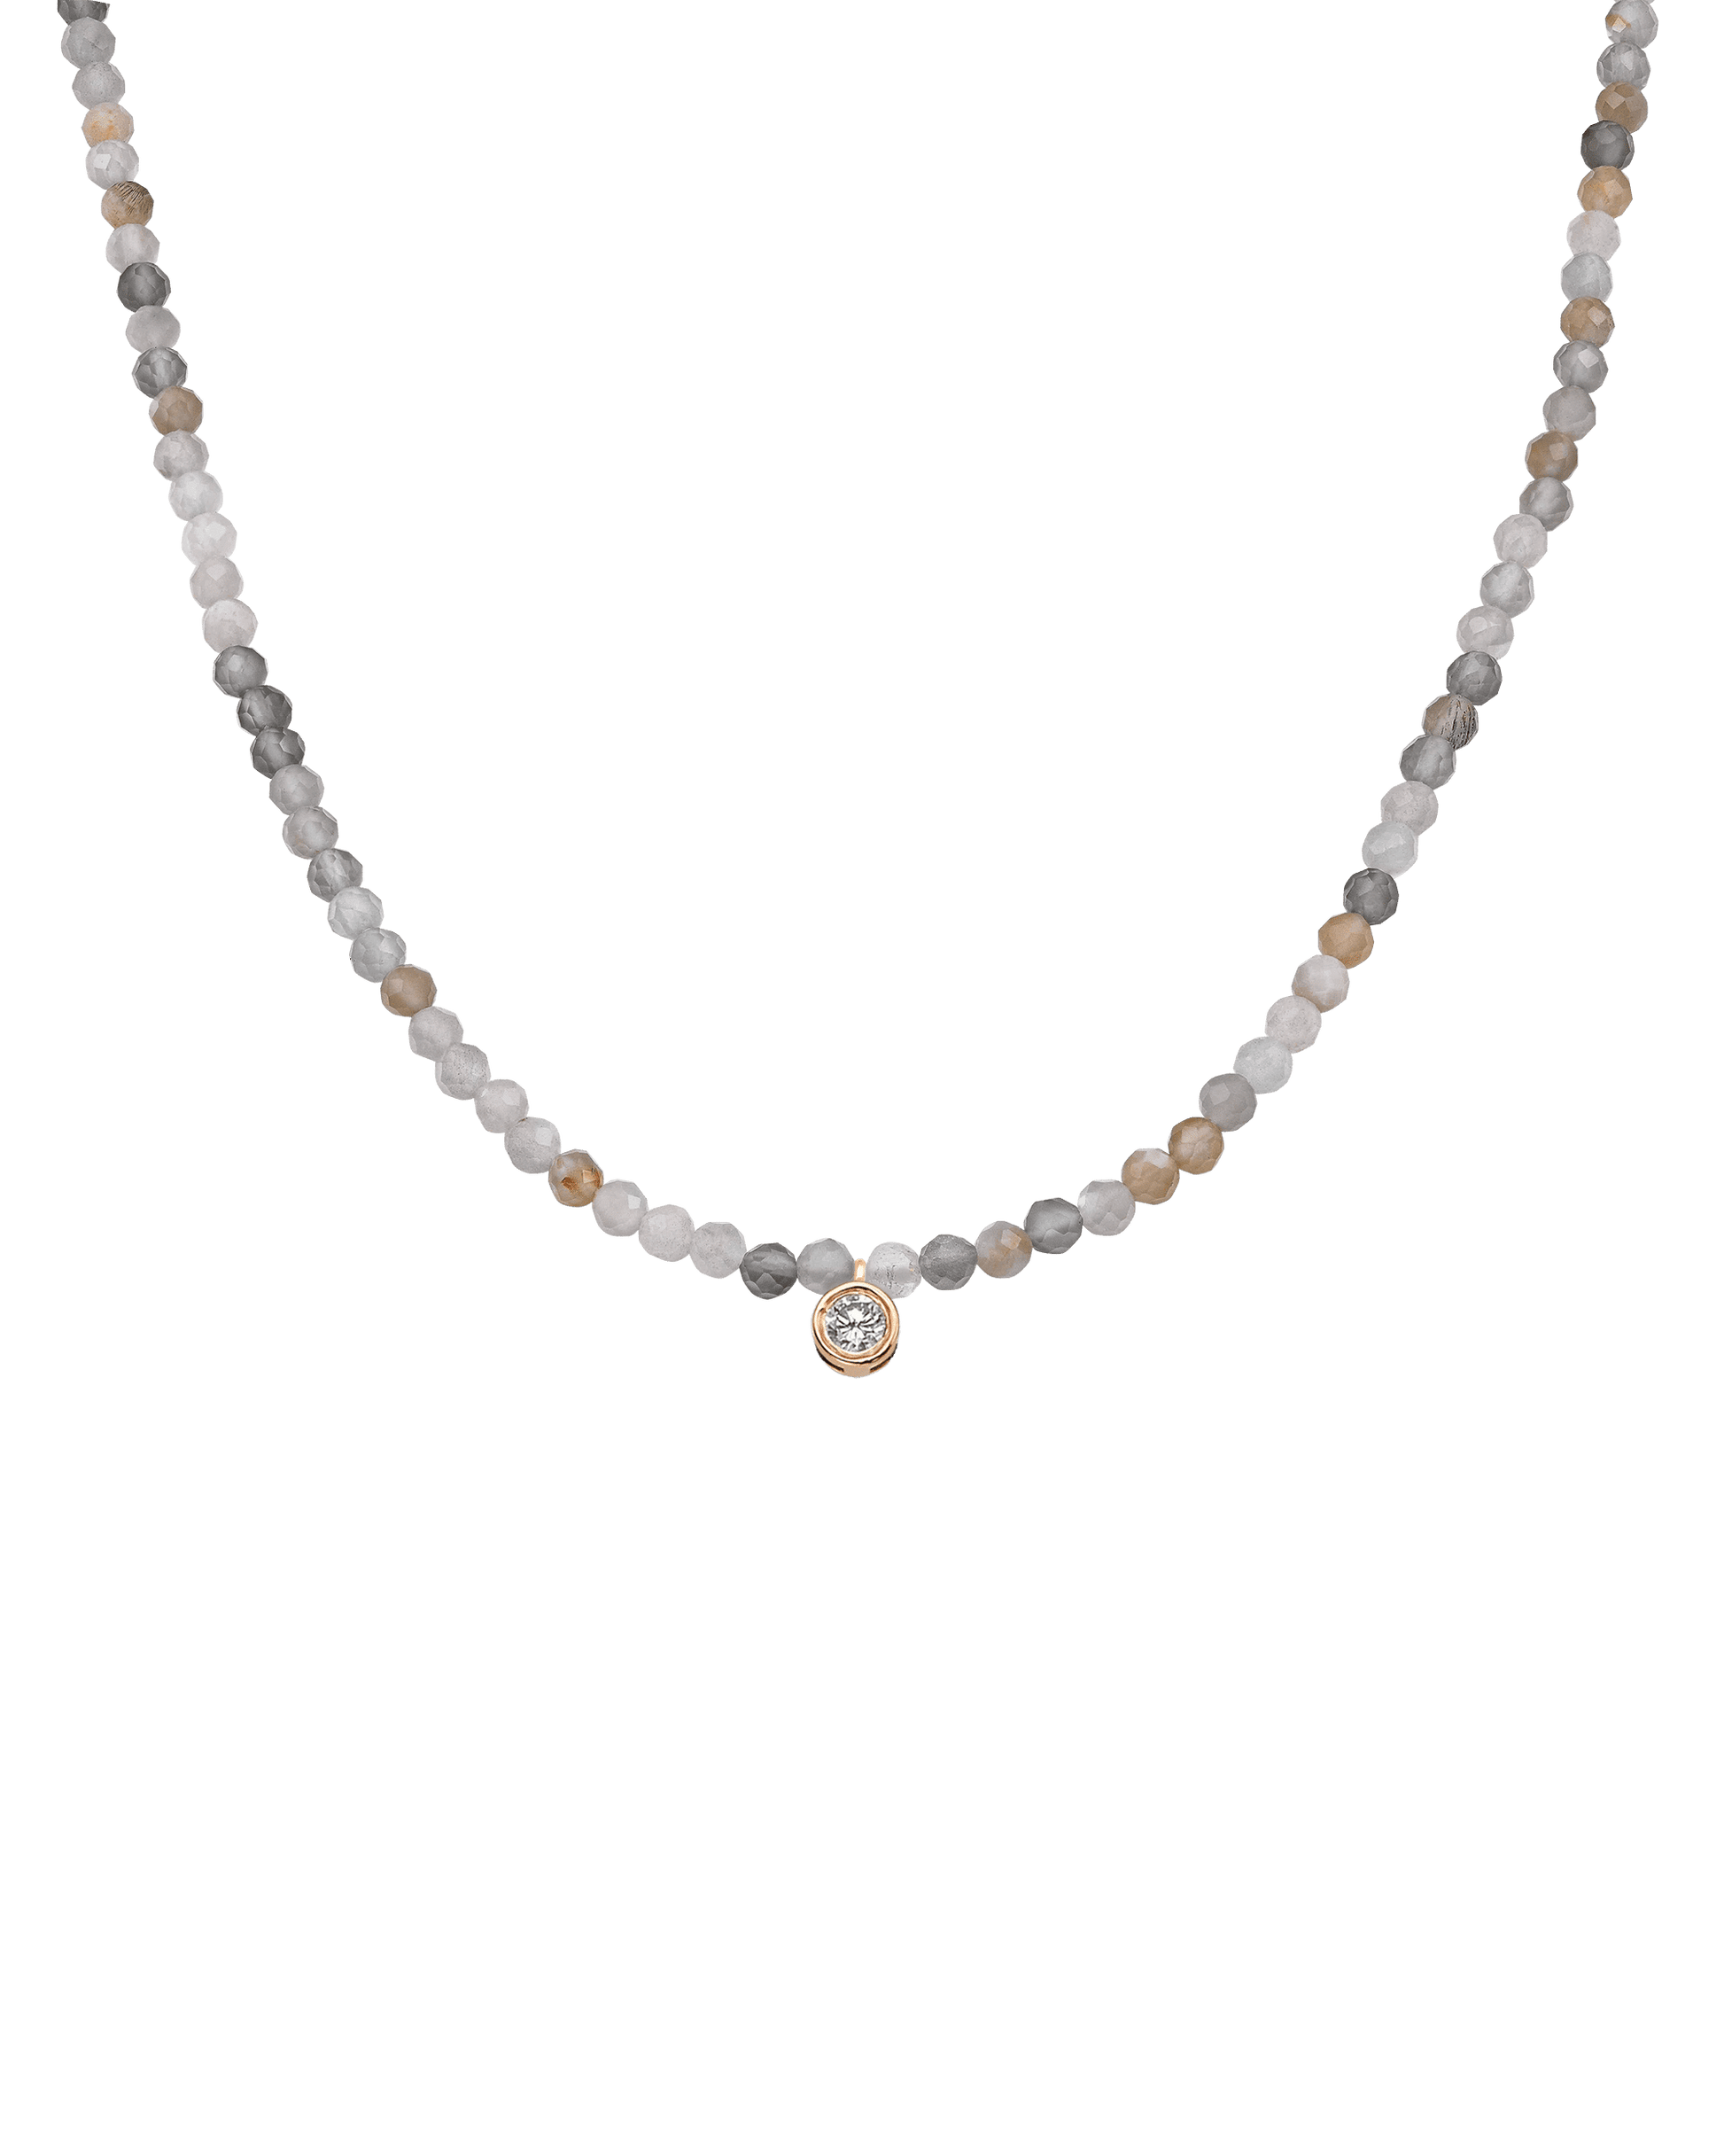 The Gemstone & Diamond Necklace - 14K Rose Gold Necklaces 14K Solid Gold Natural Moonstone Large: 0.1ct 14"